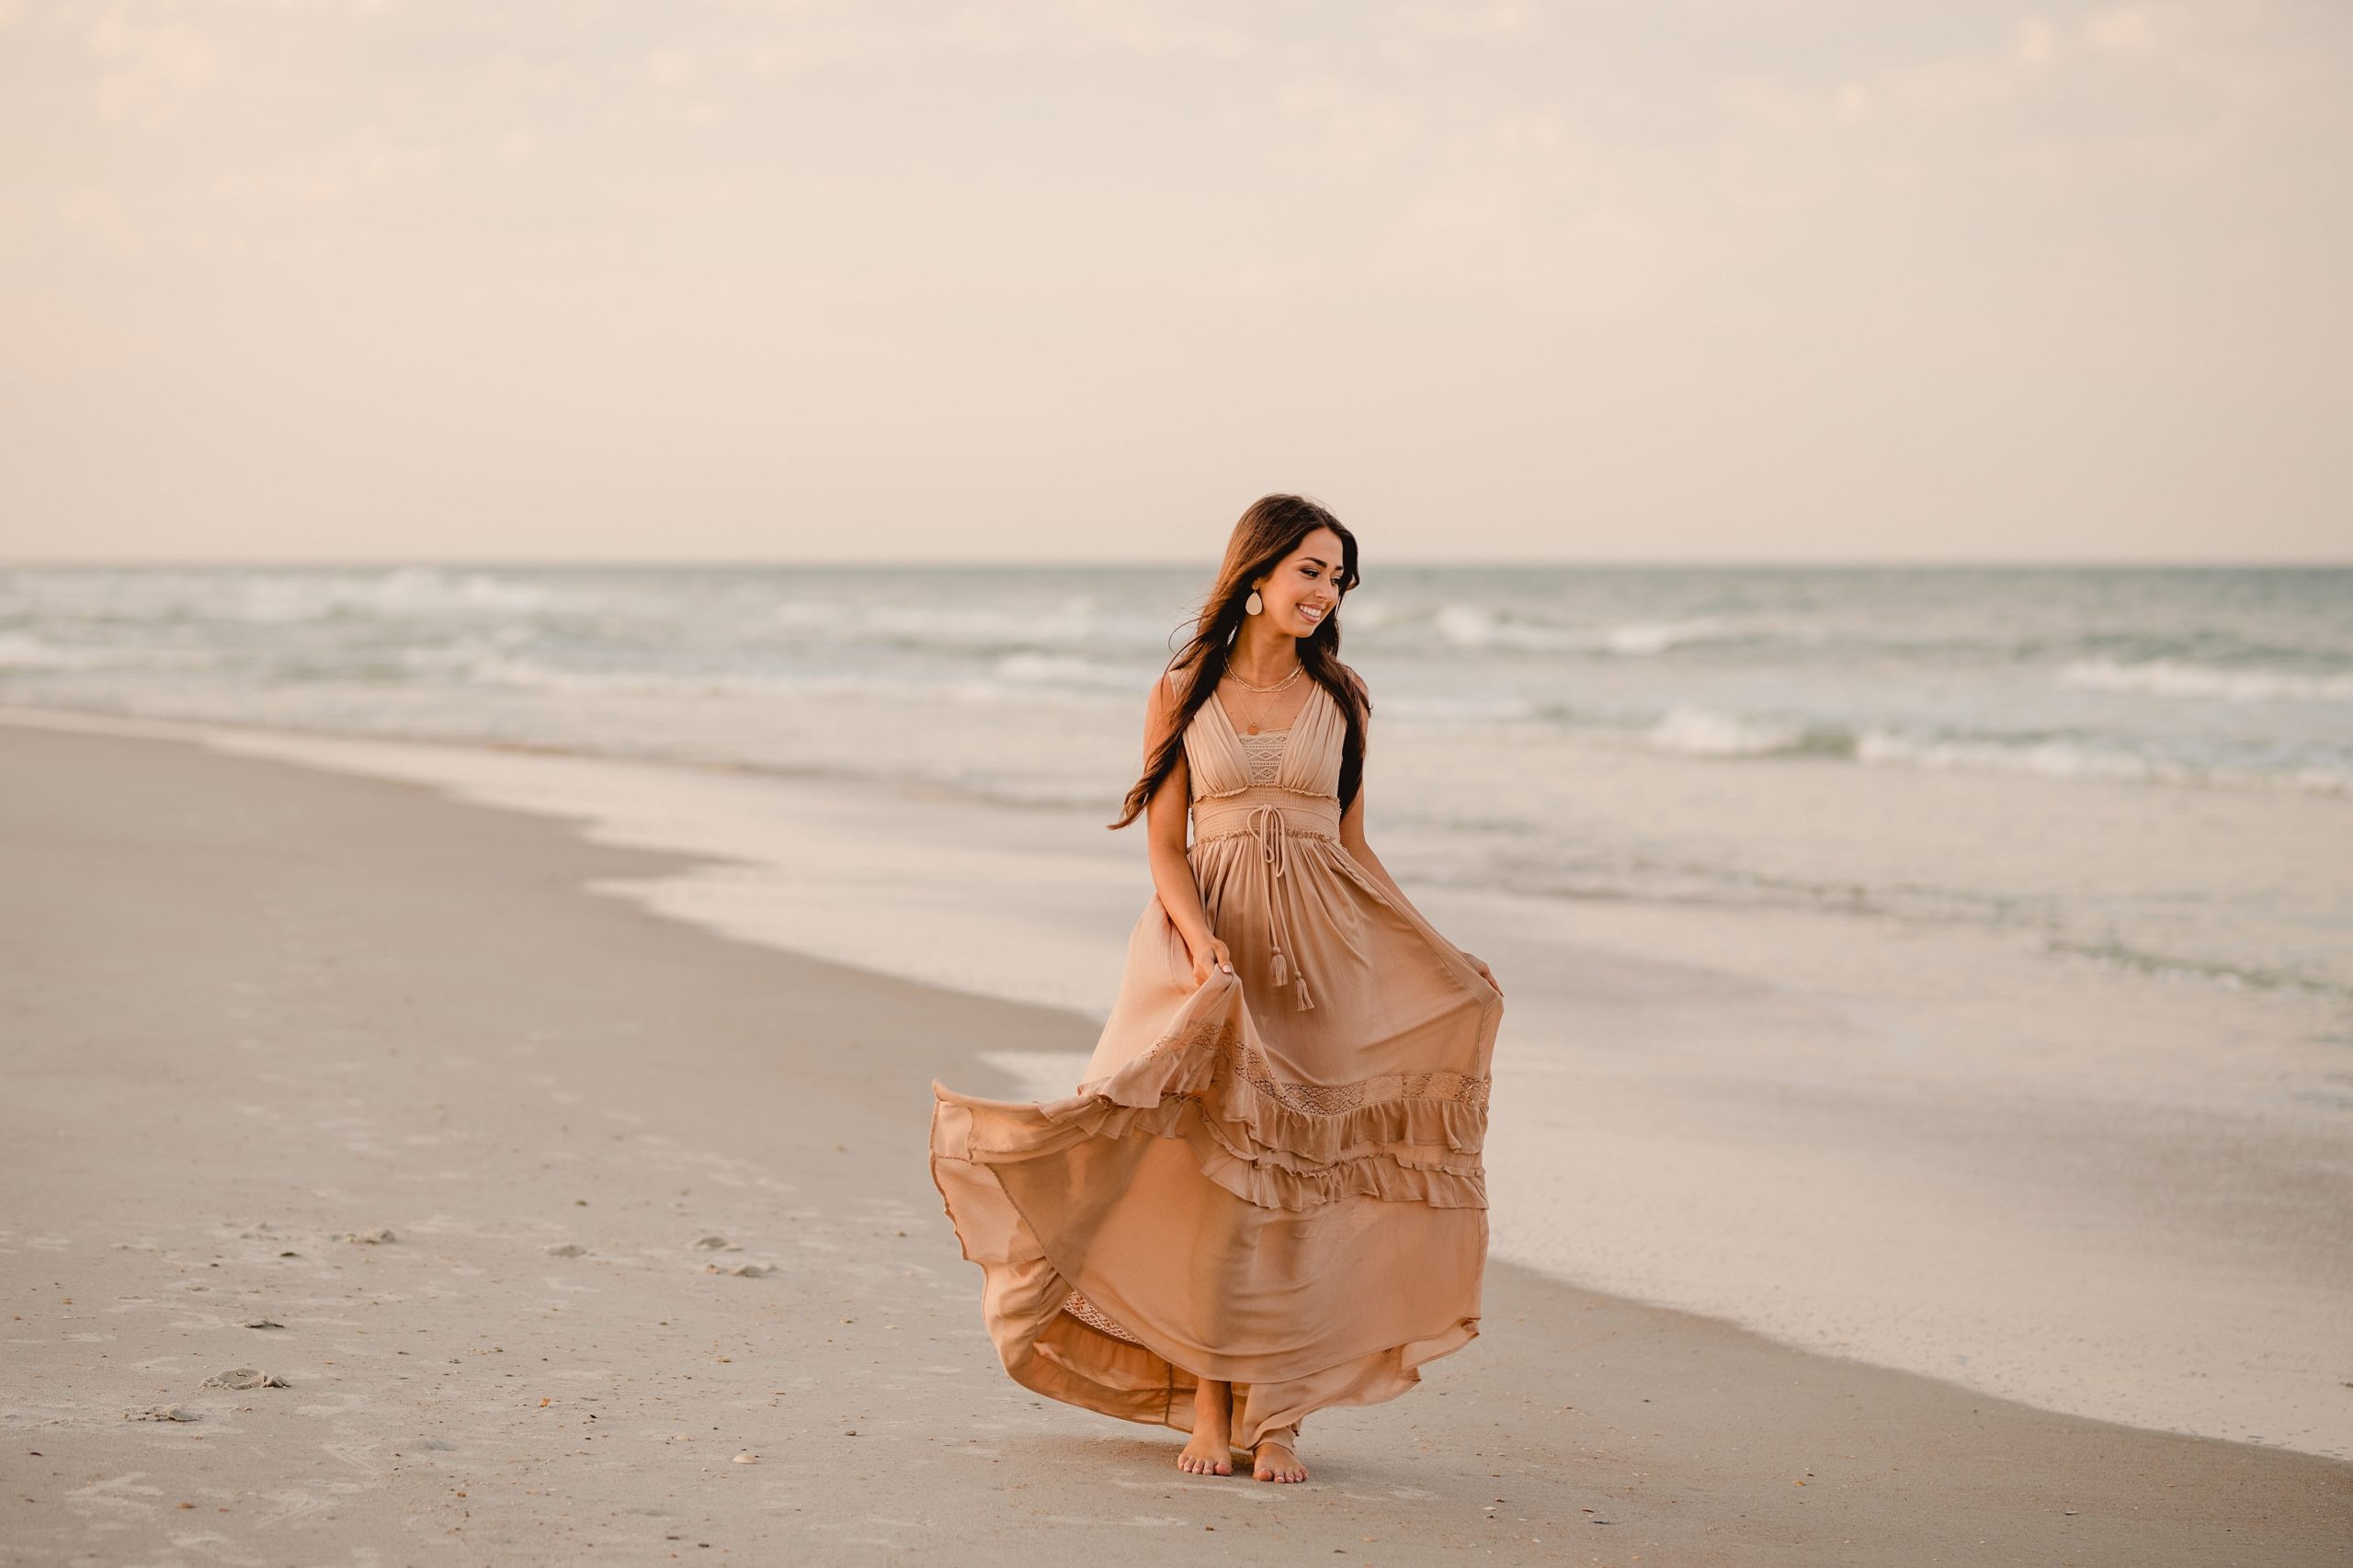 Senior pictures on the beach in St Augustine, FL. Freepeople dress